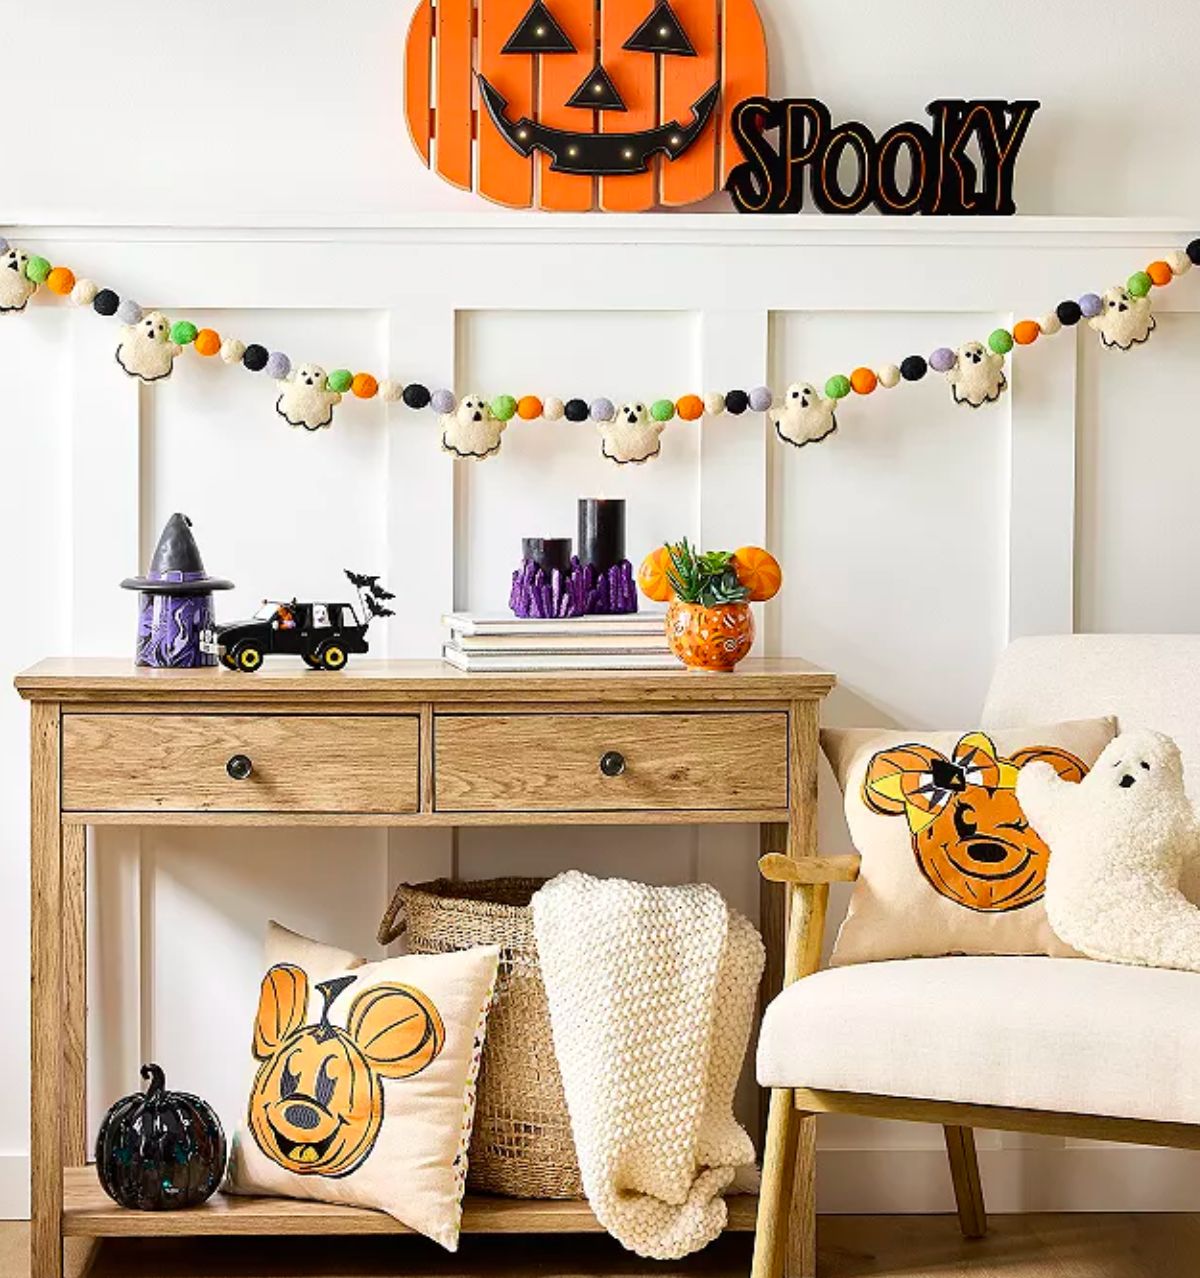 mickey mouse pillows on a chair and spooky led neon sign decorating a halloween scene